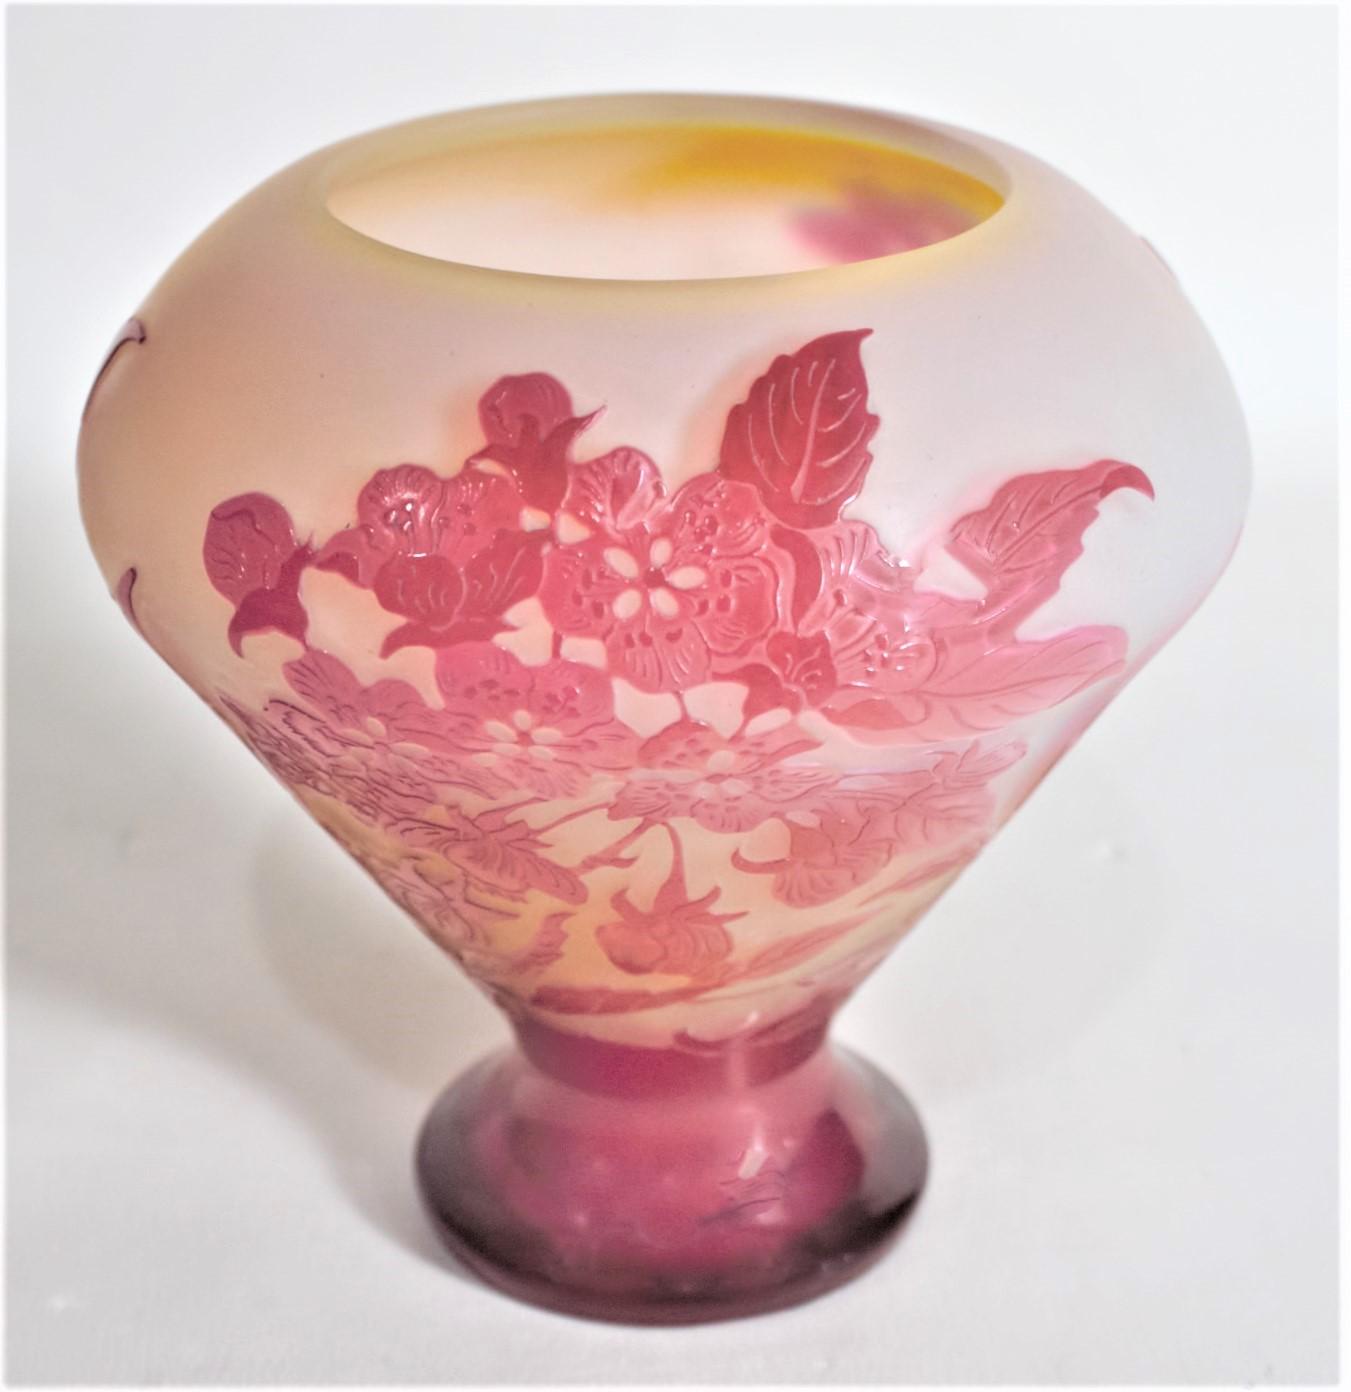 Hand-Crafted Emile Galle Cameo Art Glass Cabinet Vase with Exotic Floral and Leaf Decoration